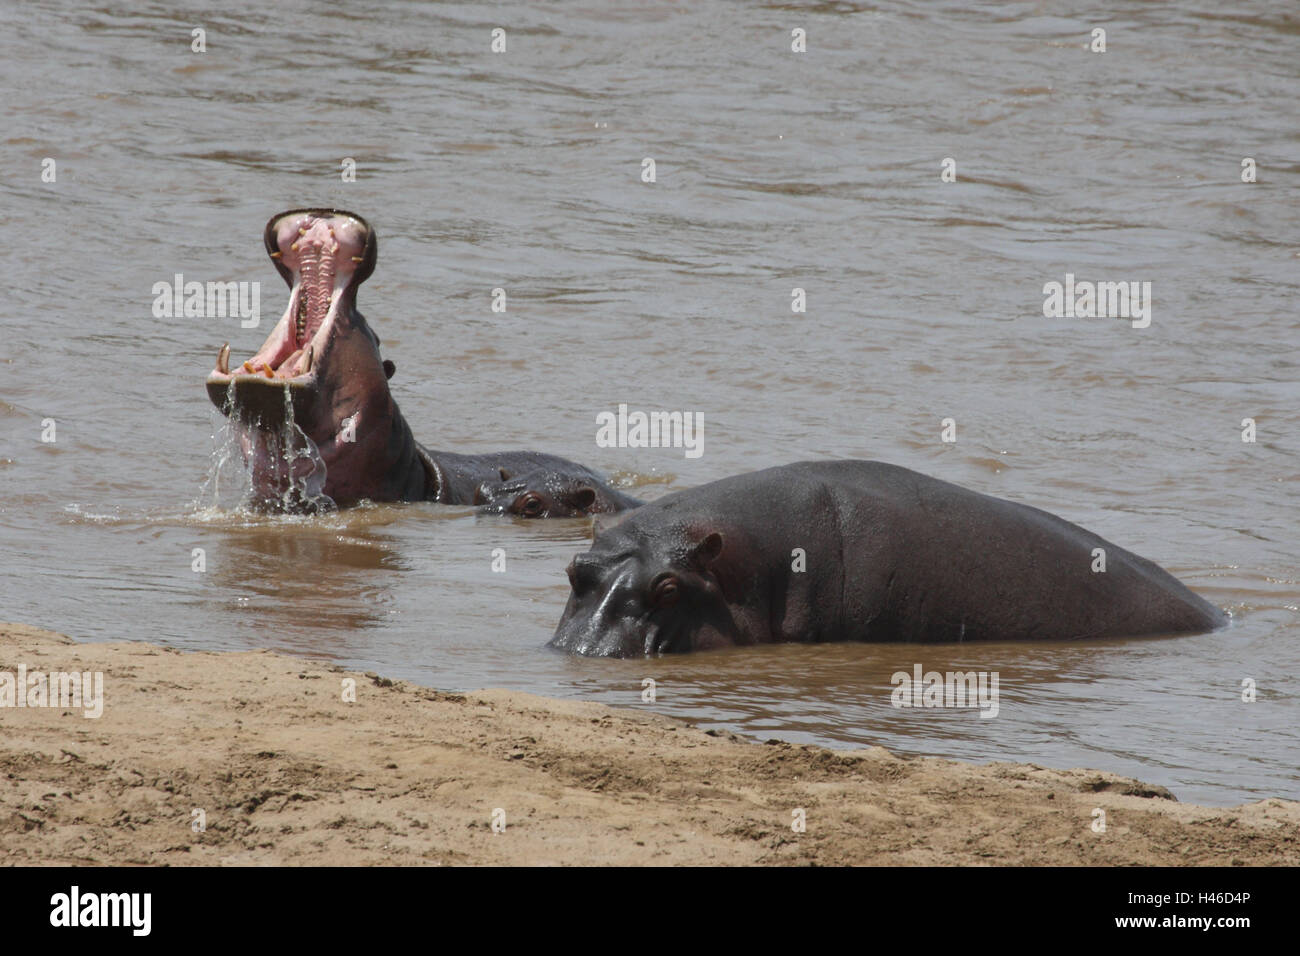 Hippopotami in the water, mouth openly, Stock Photo